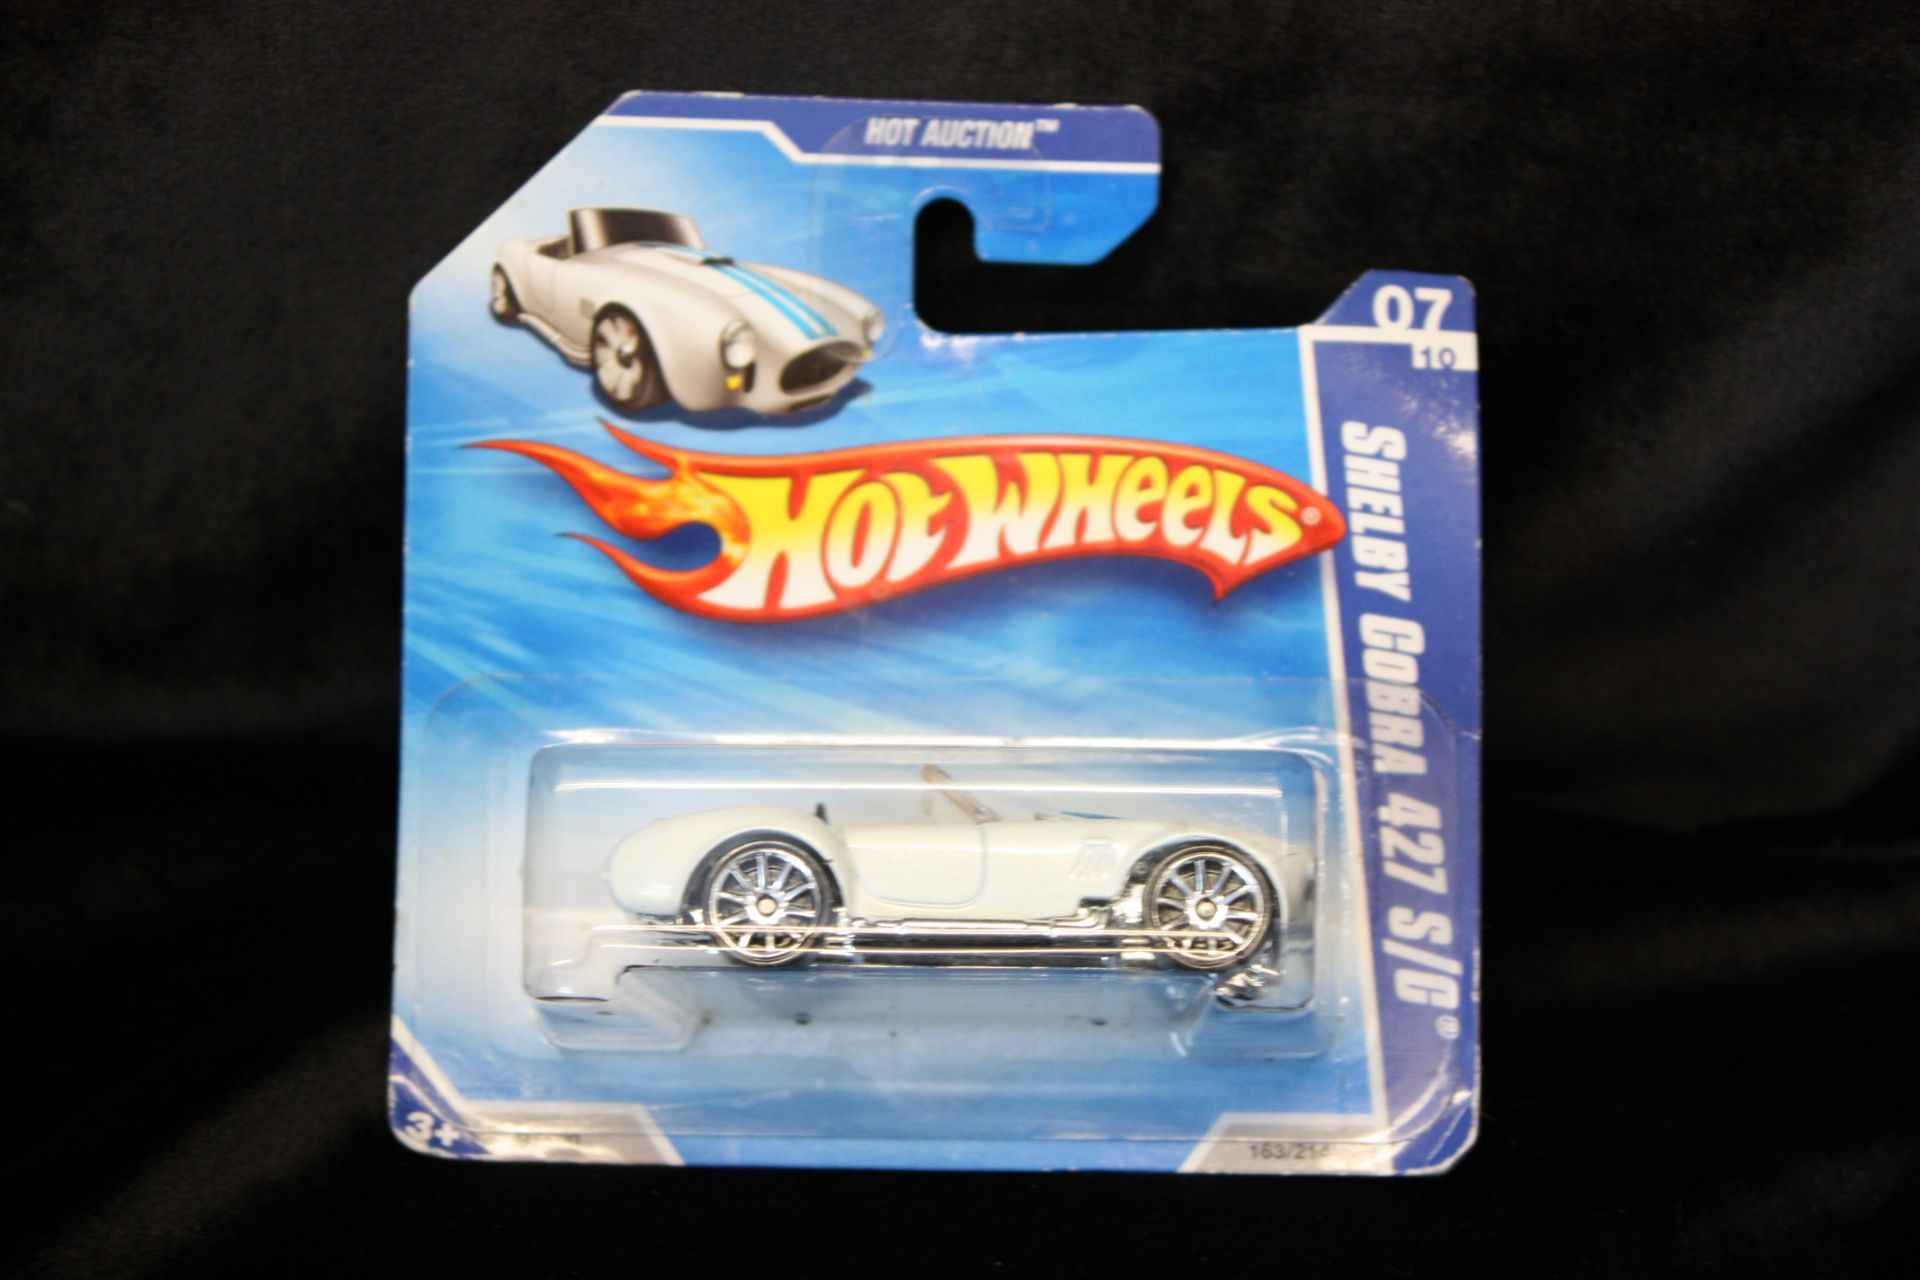 Hot Wheels Hot Auction Shelby Cobra 427 S/C. Model is part of an old private collection - All